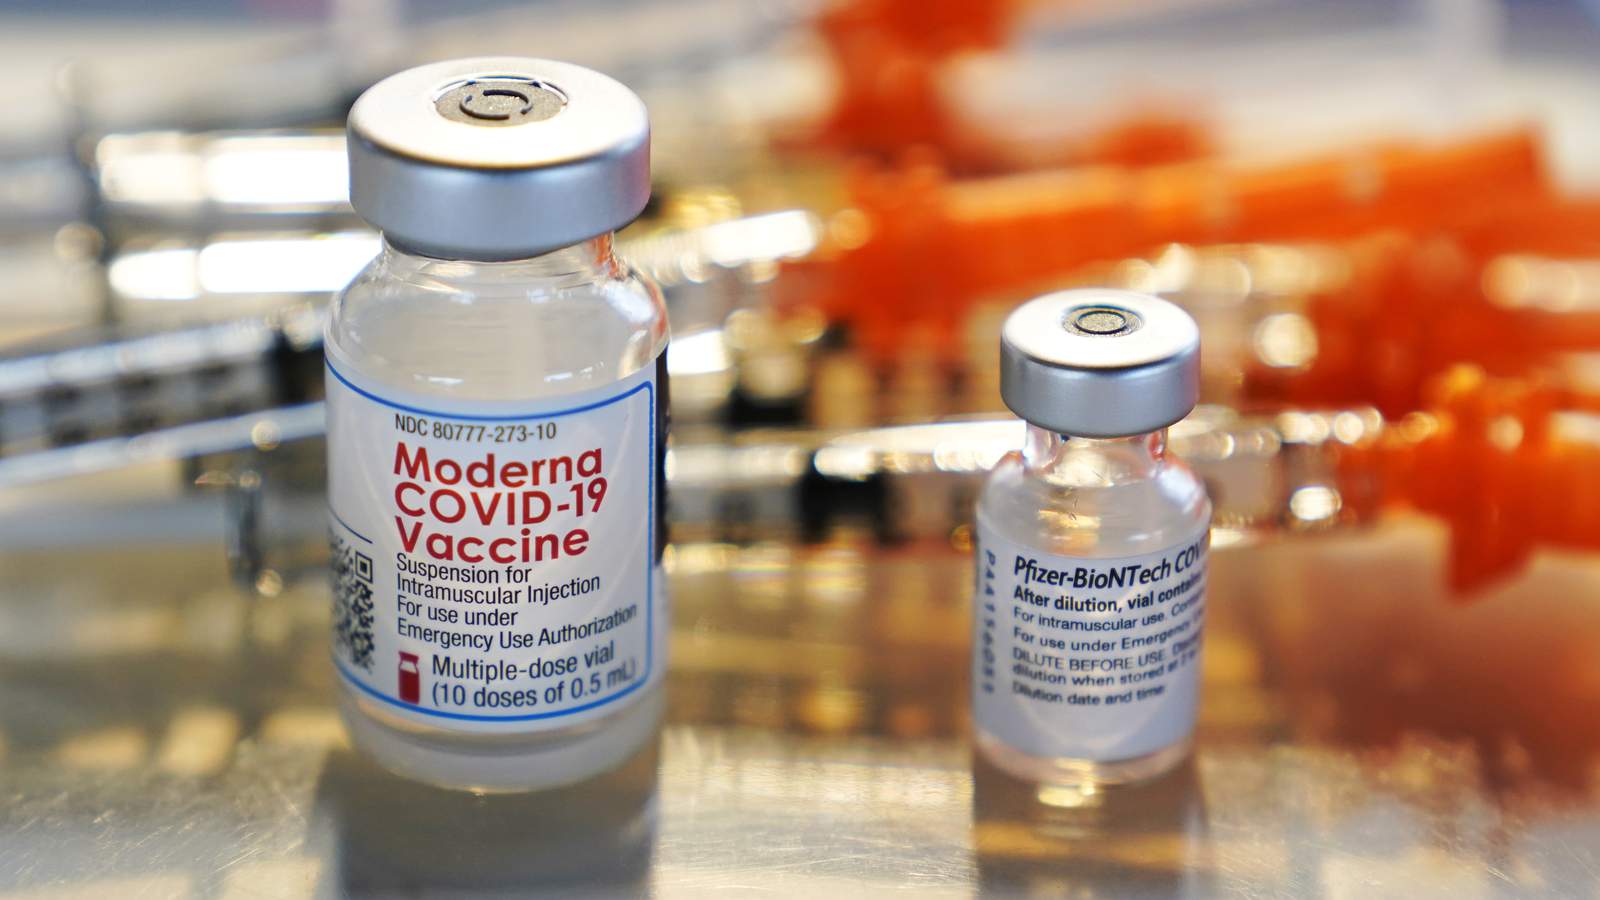 More than 1 million first doses of COVID-19 vaccine coming to Texas this week